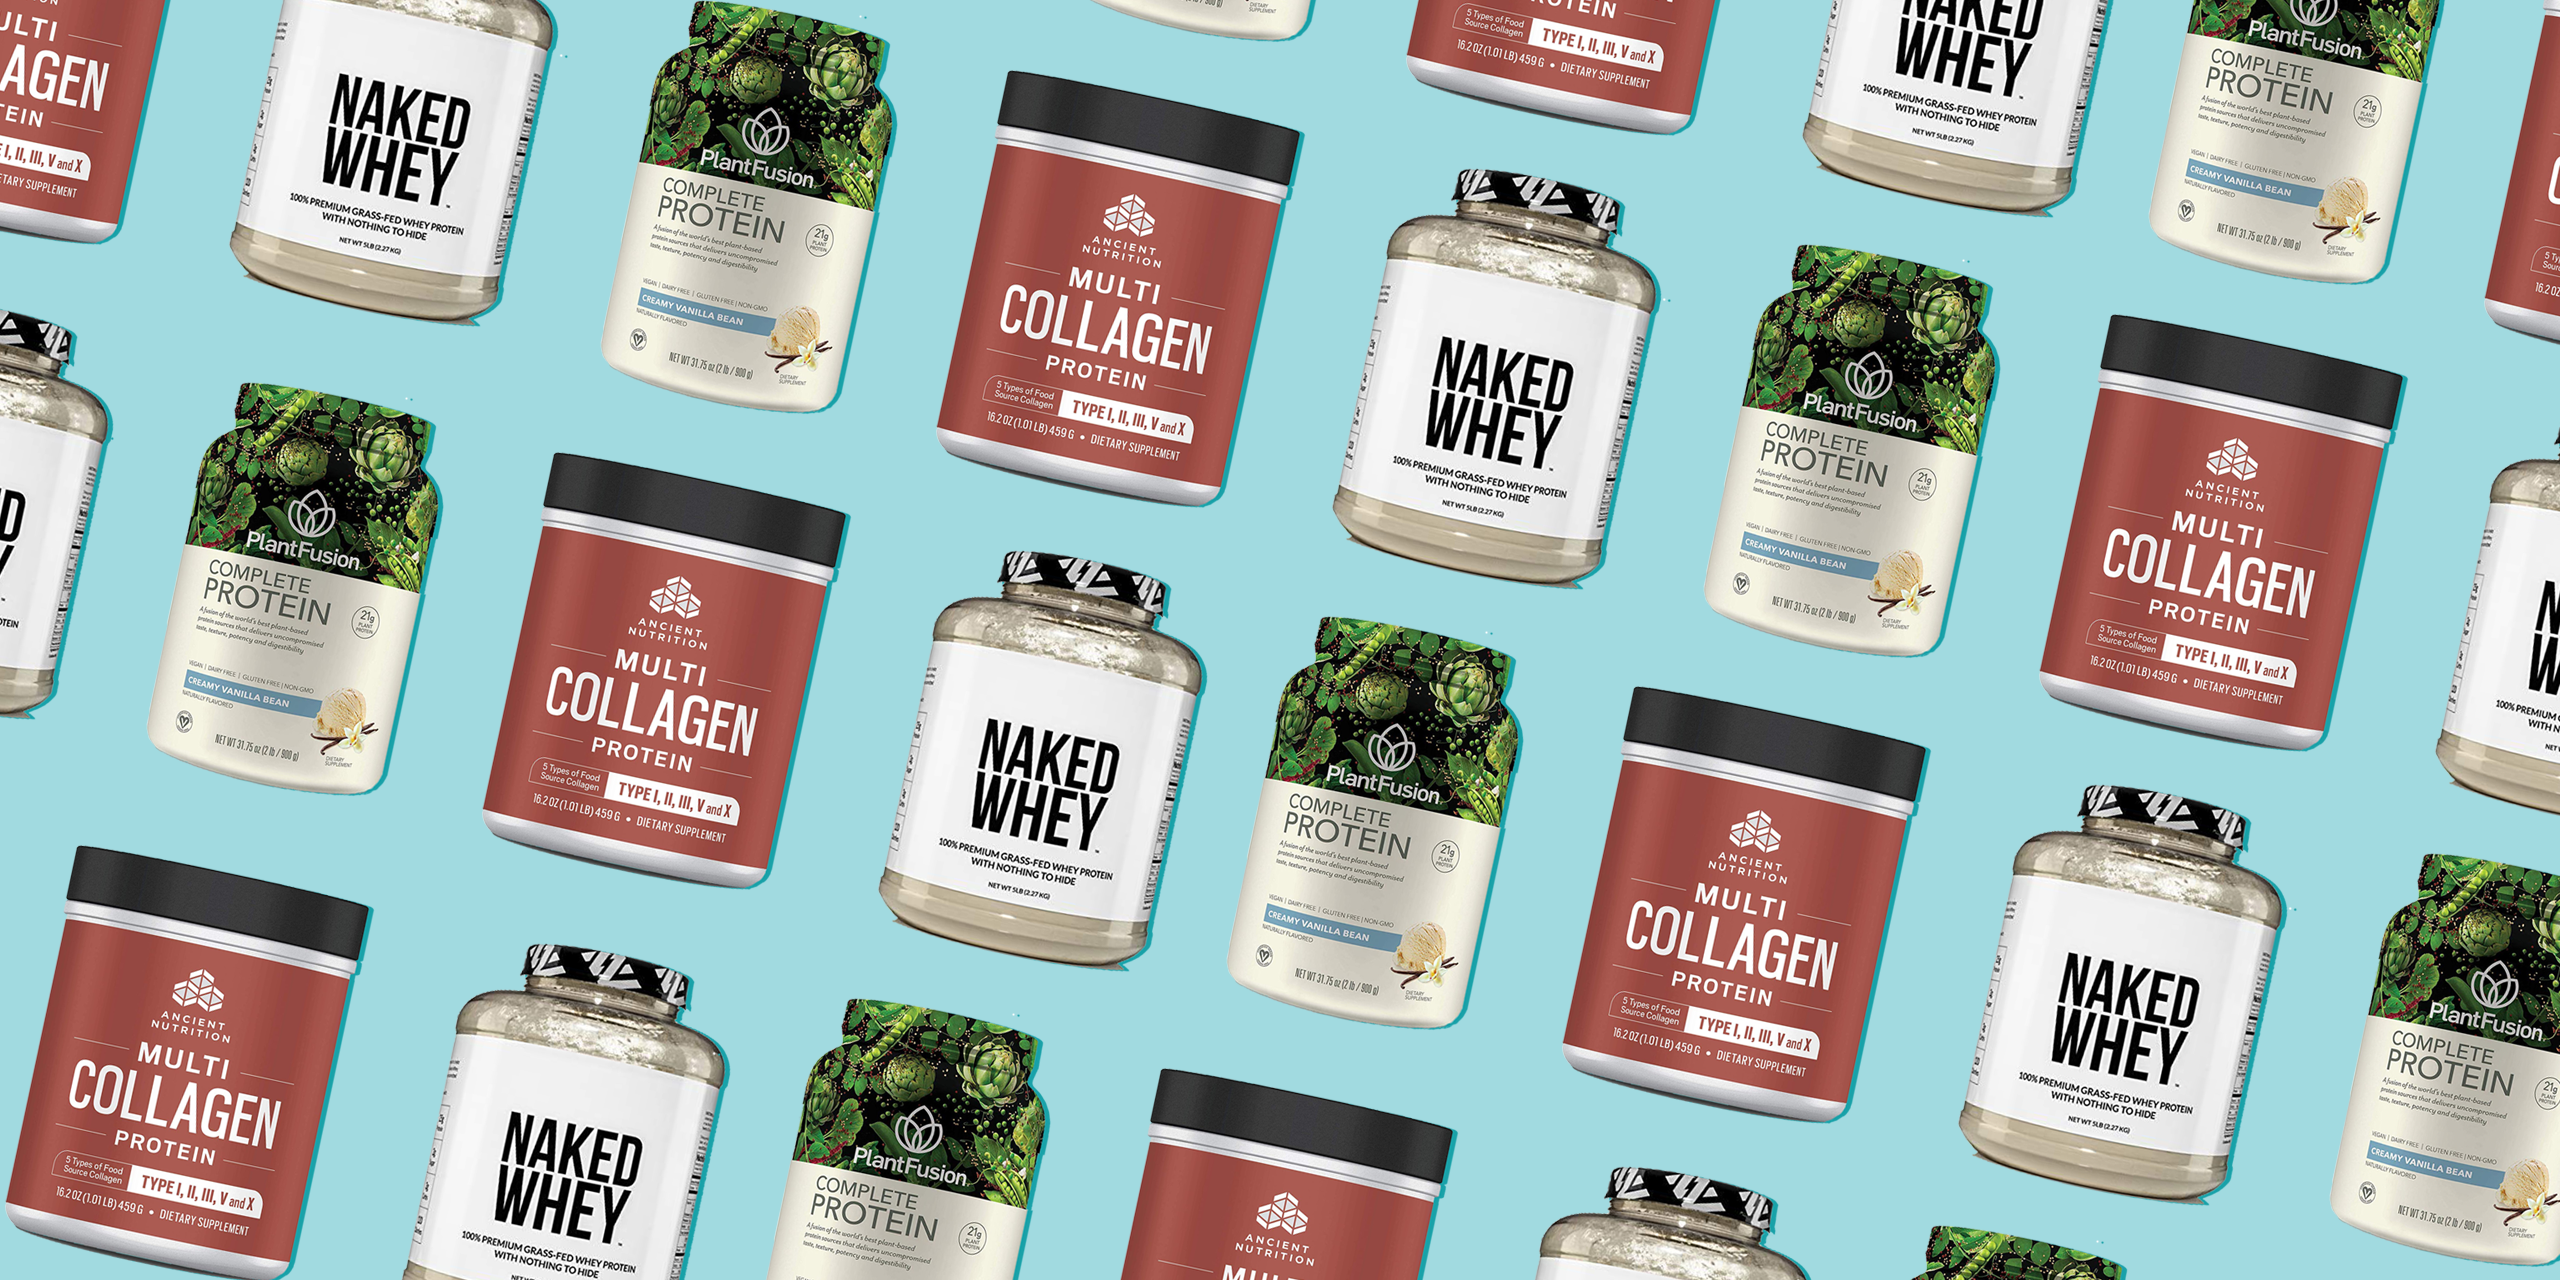 32 Best Protein Powders 2020 According To Dietitians,8th Anniversary Bronze Gifts For Husband